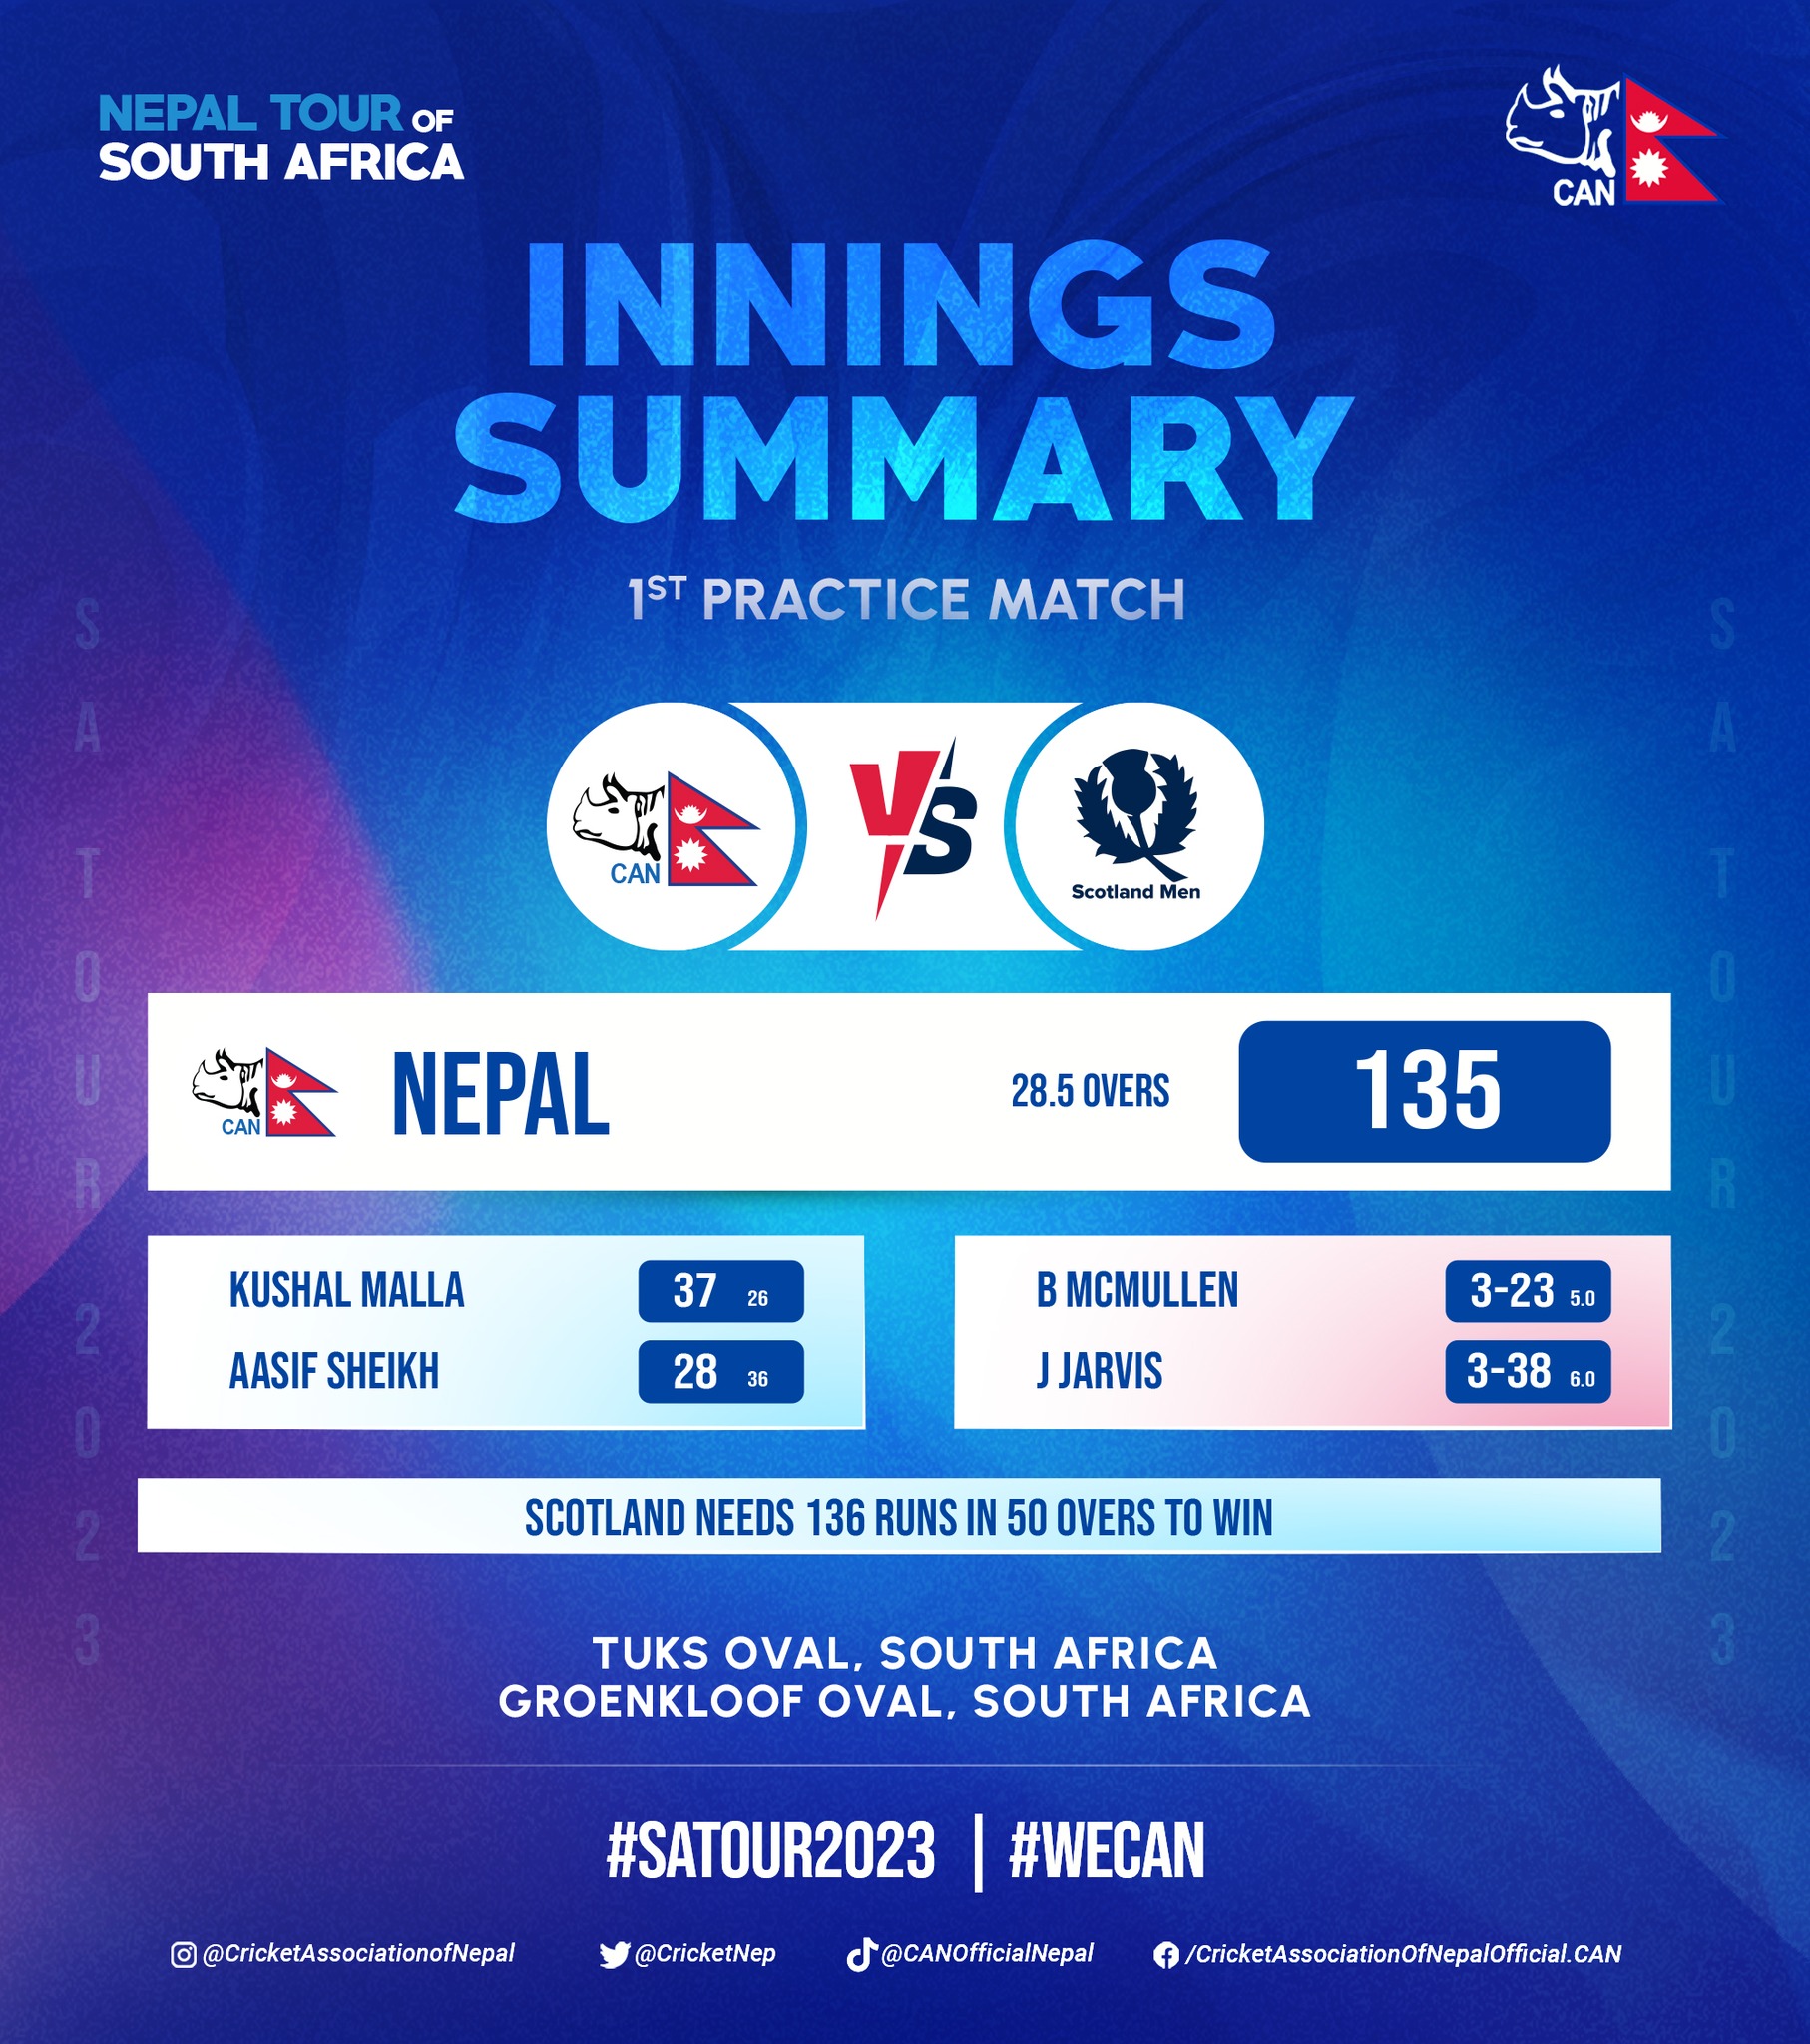 Nepal all out for 135 runs in practice match against Scotland